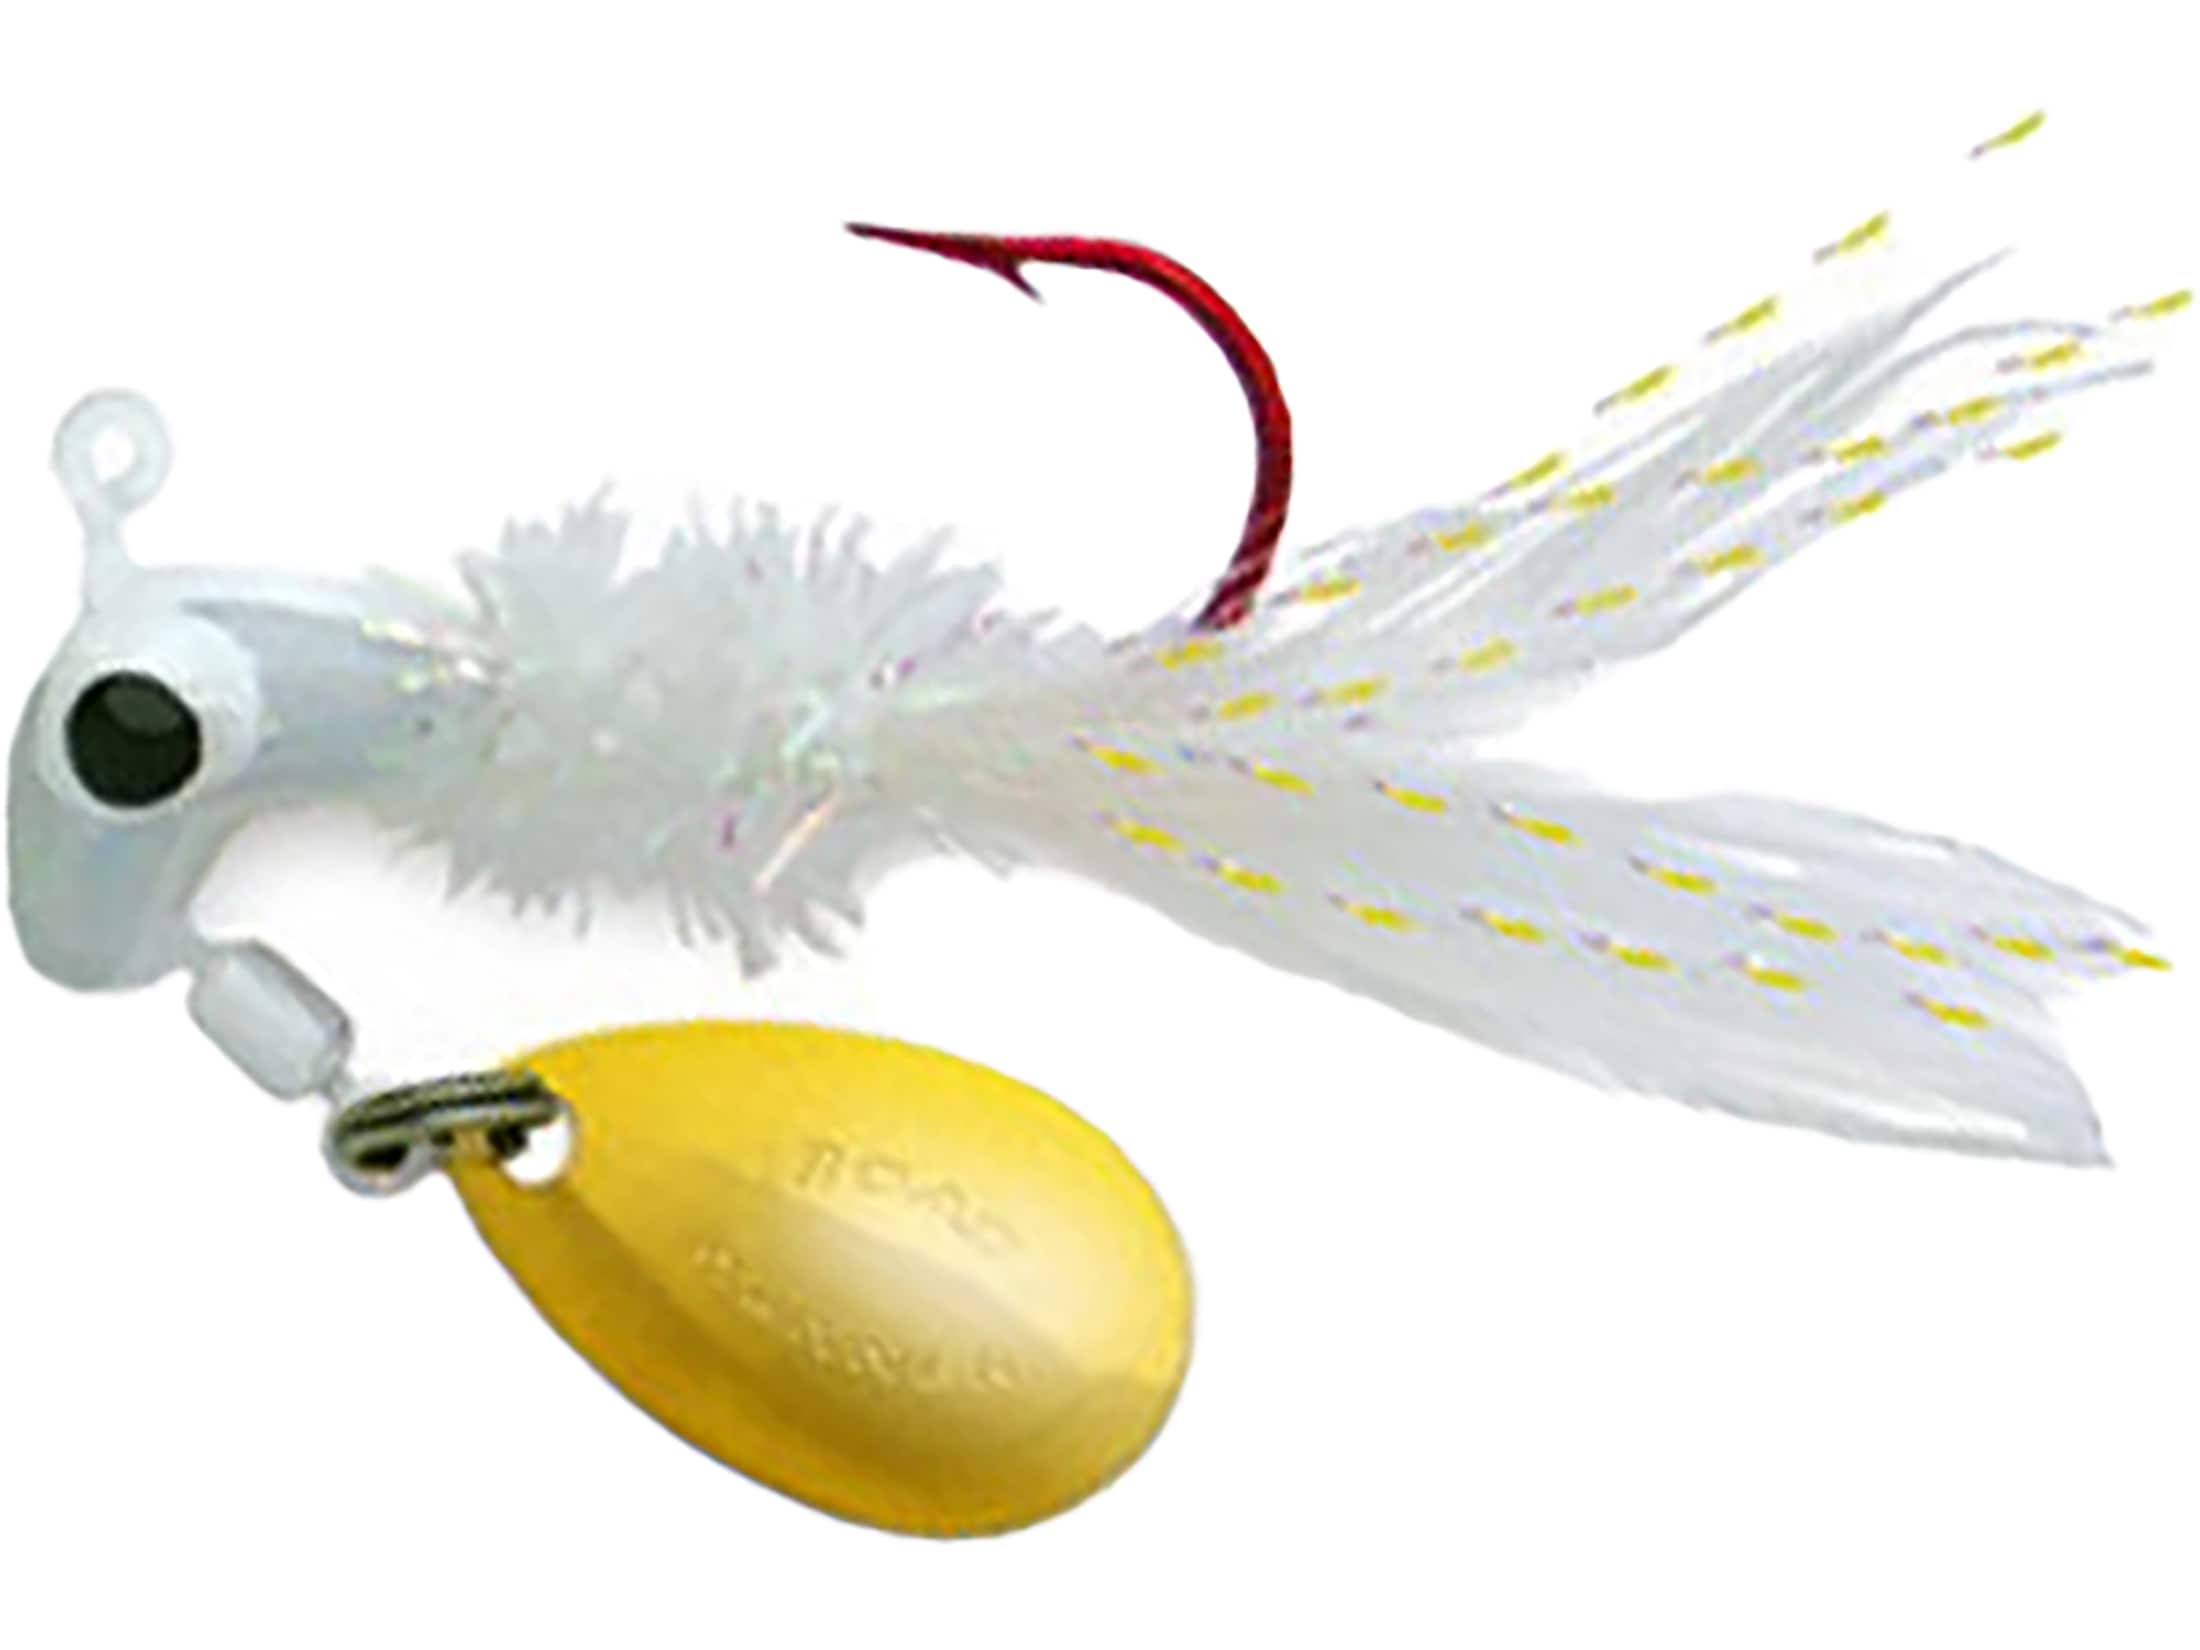 Road Runner Crappie Thunder 1/8oz fl red/white/pearl